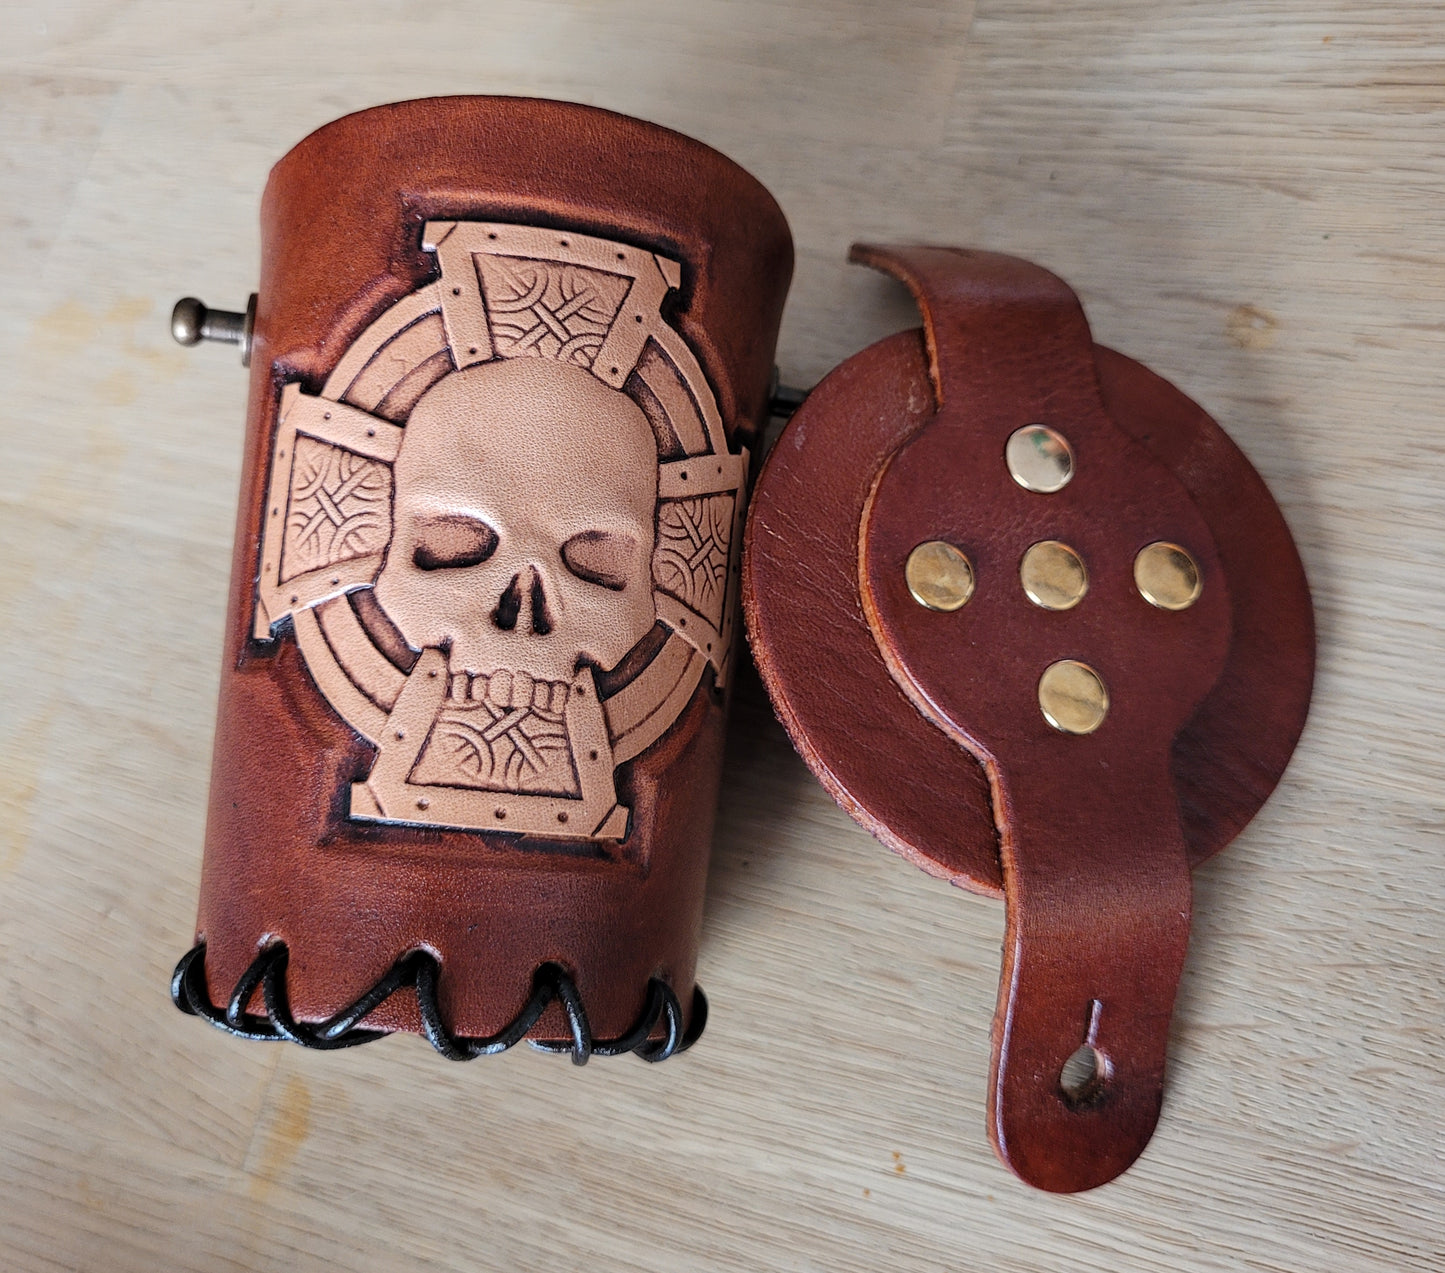 Dice cup - Skull and cross